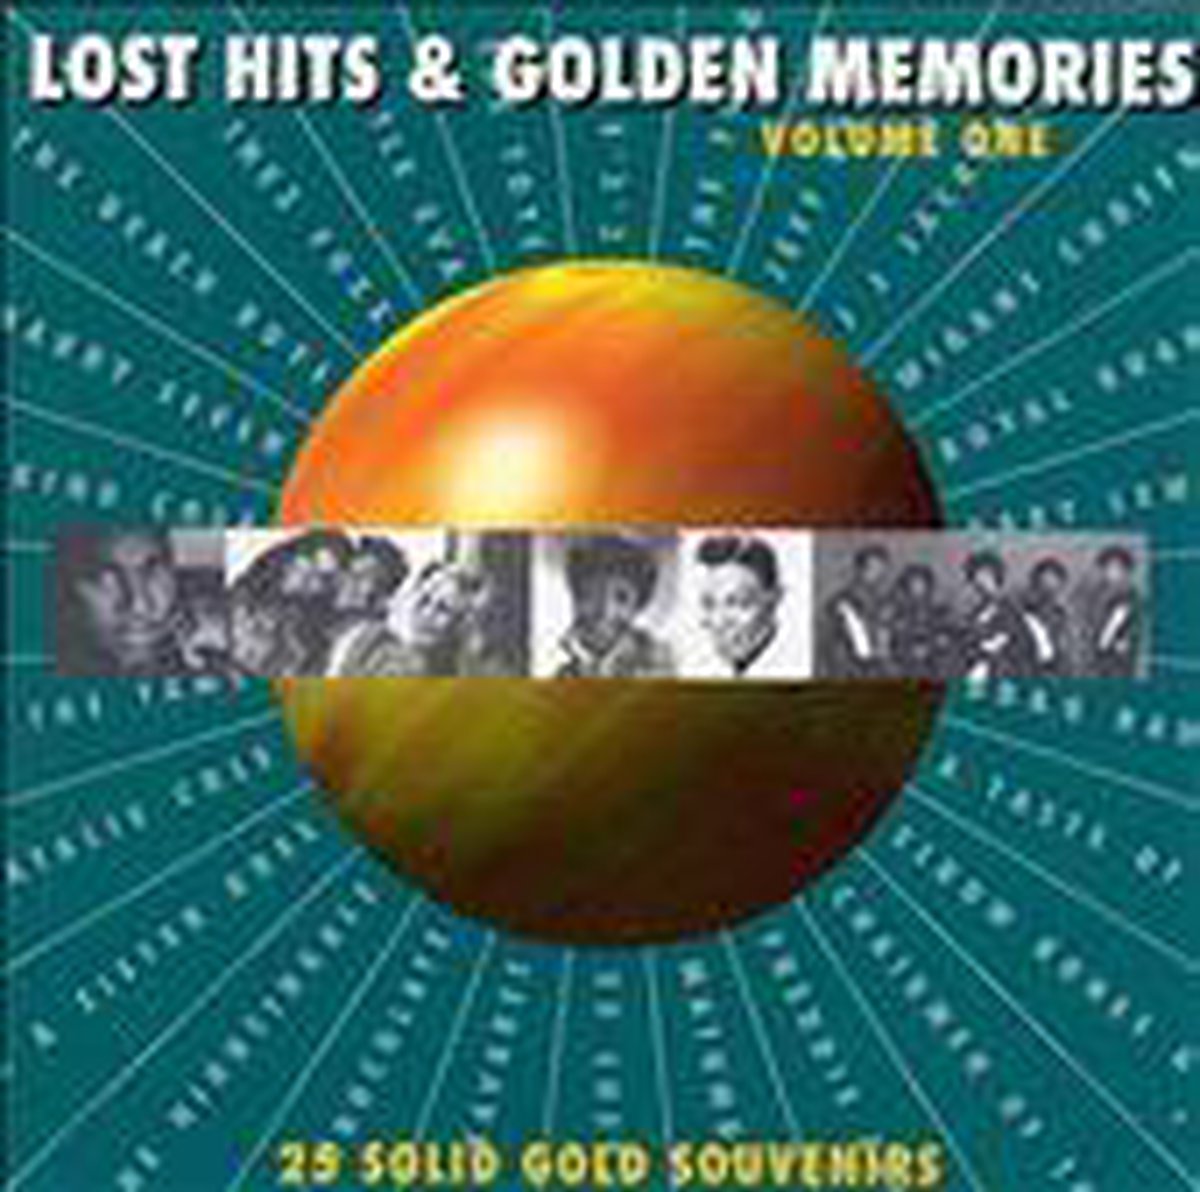 Lost Hits And Golden Memories Vol. 1 - various artists